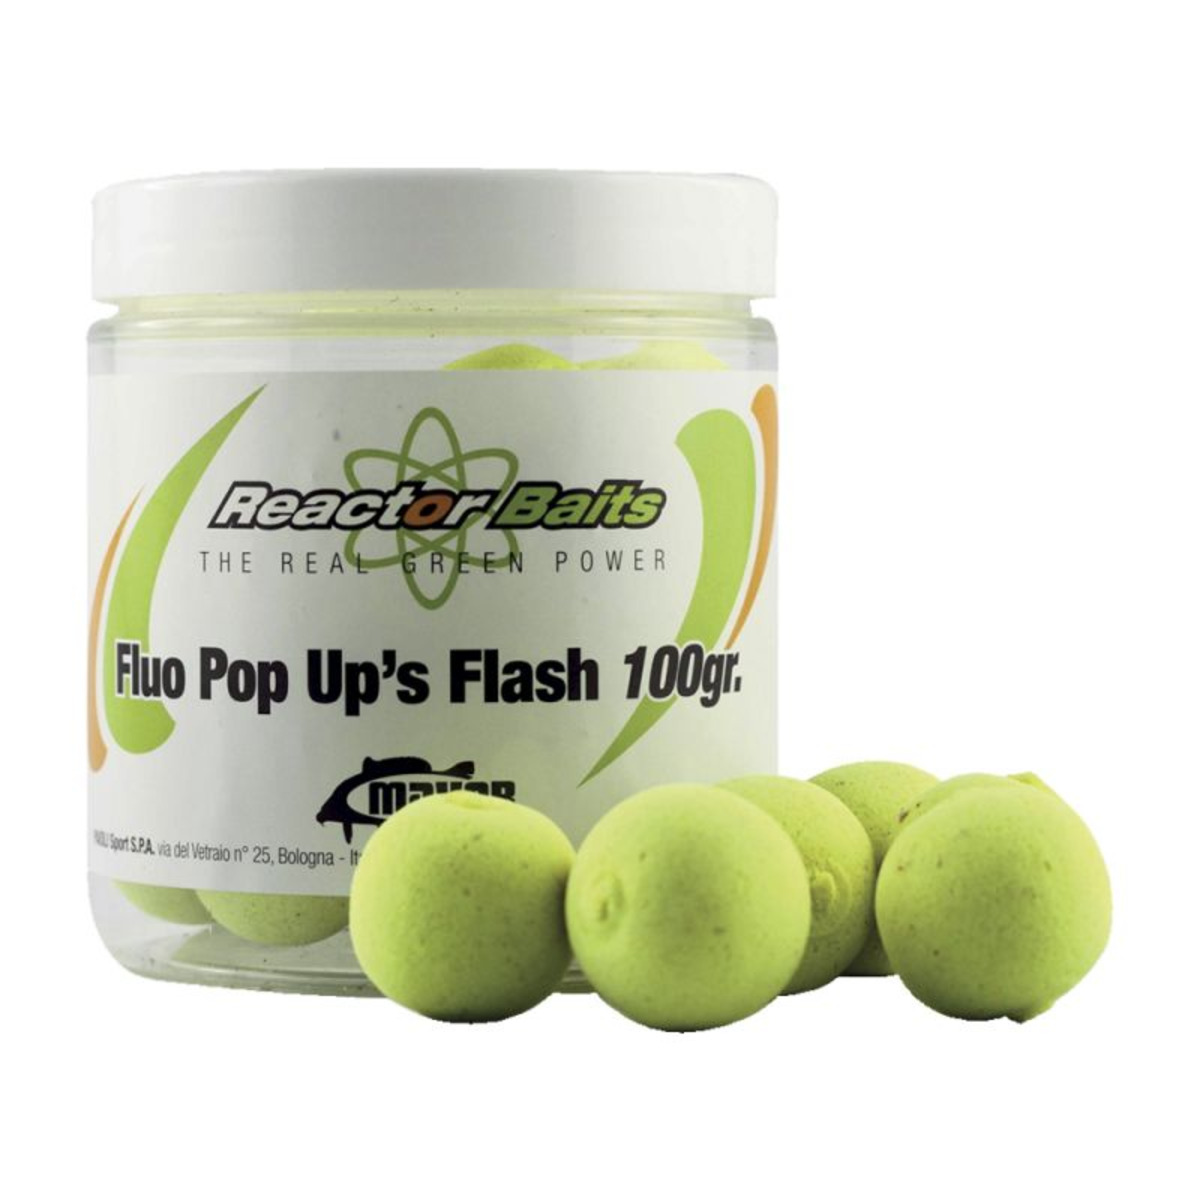 Reactor Baits Pop Up Flash Fluo Neutral Flavour - Yellow Fluo - 15 mm